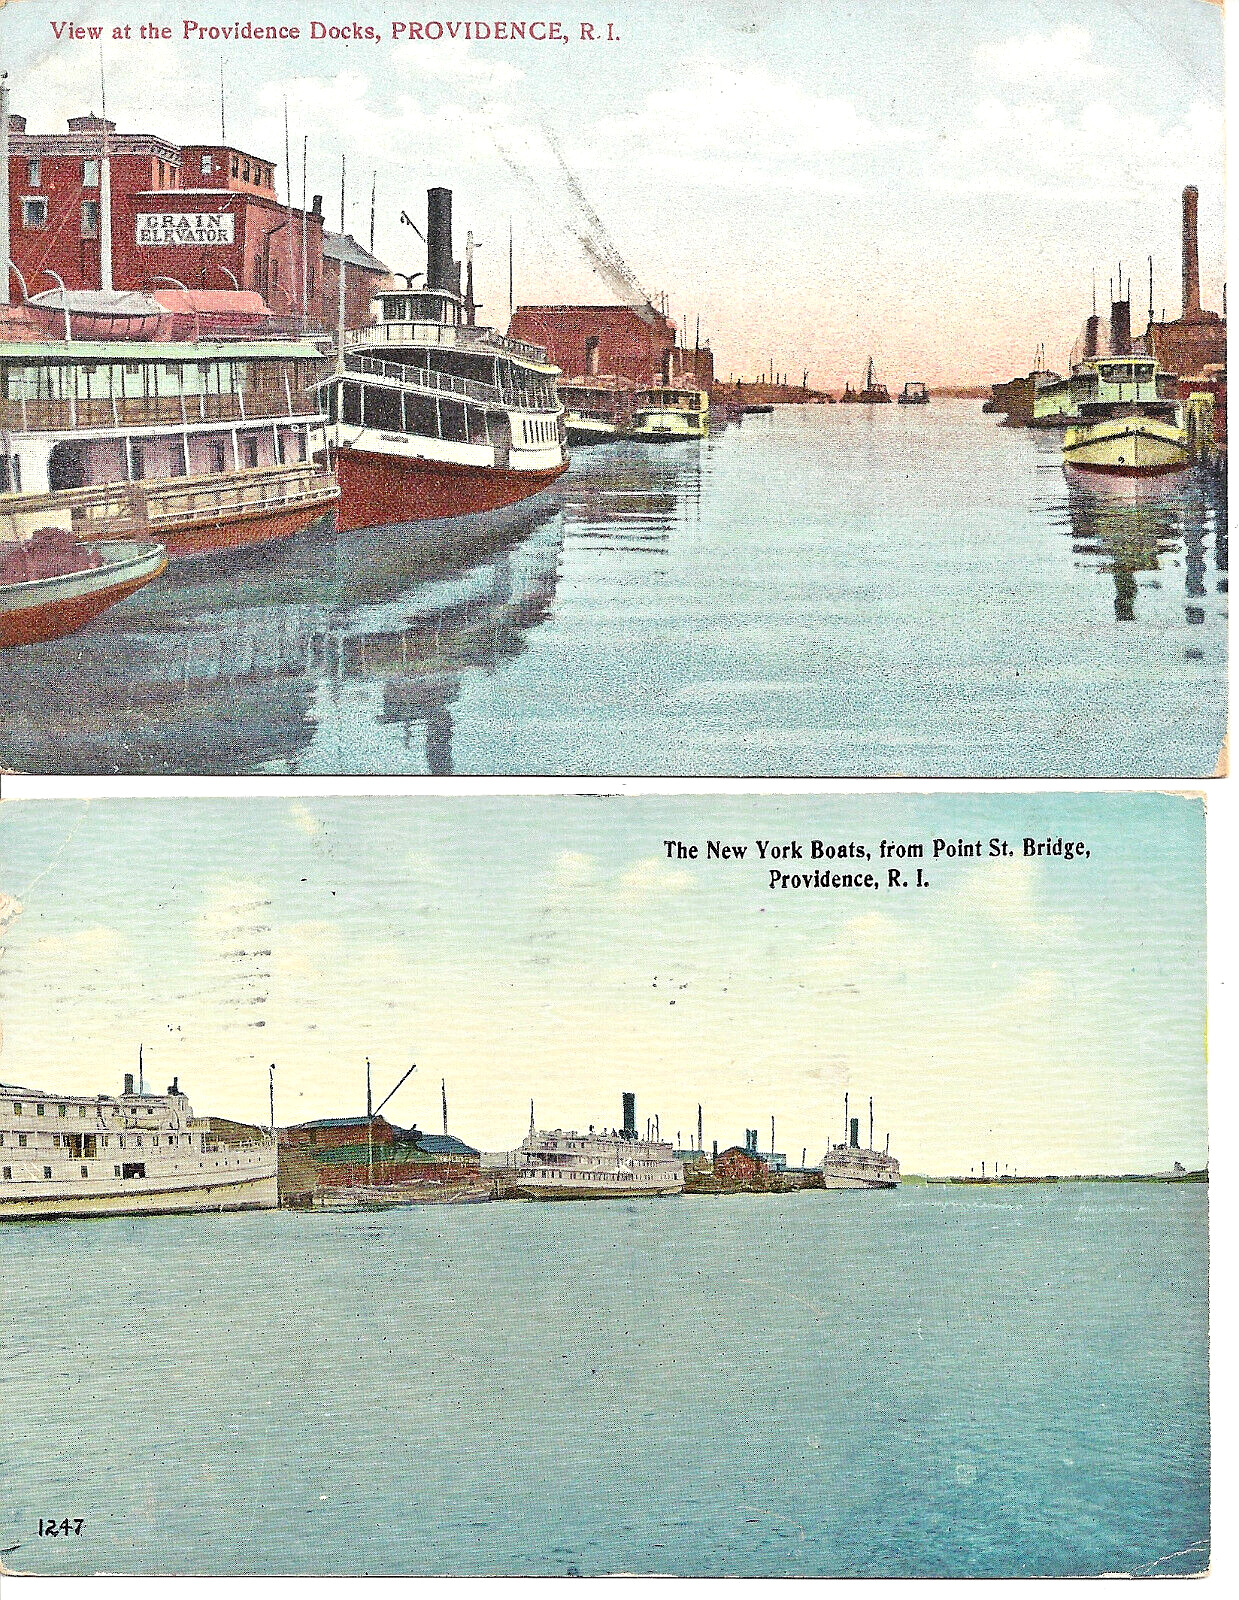 Two (2) PROVIDENCE, R.I. WATERFRONT POSTCARDS 1907 & 1912 POSTED